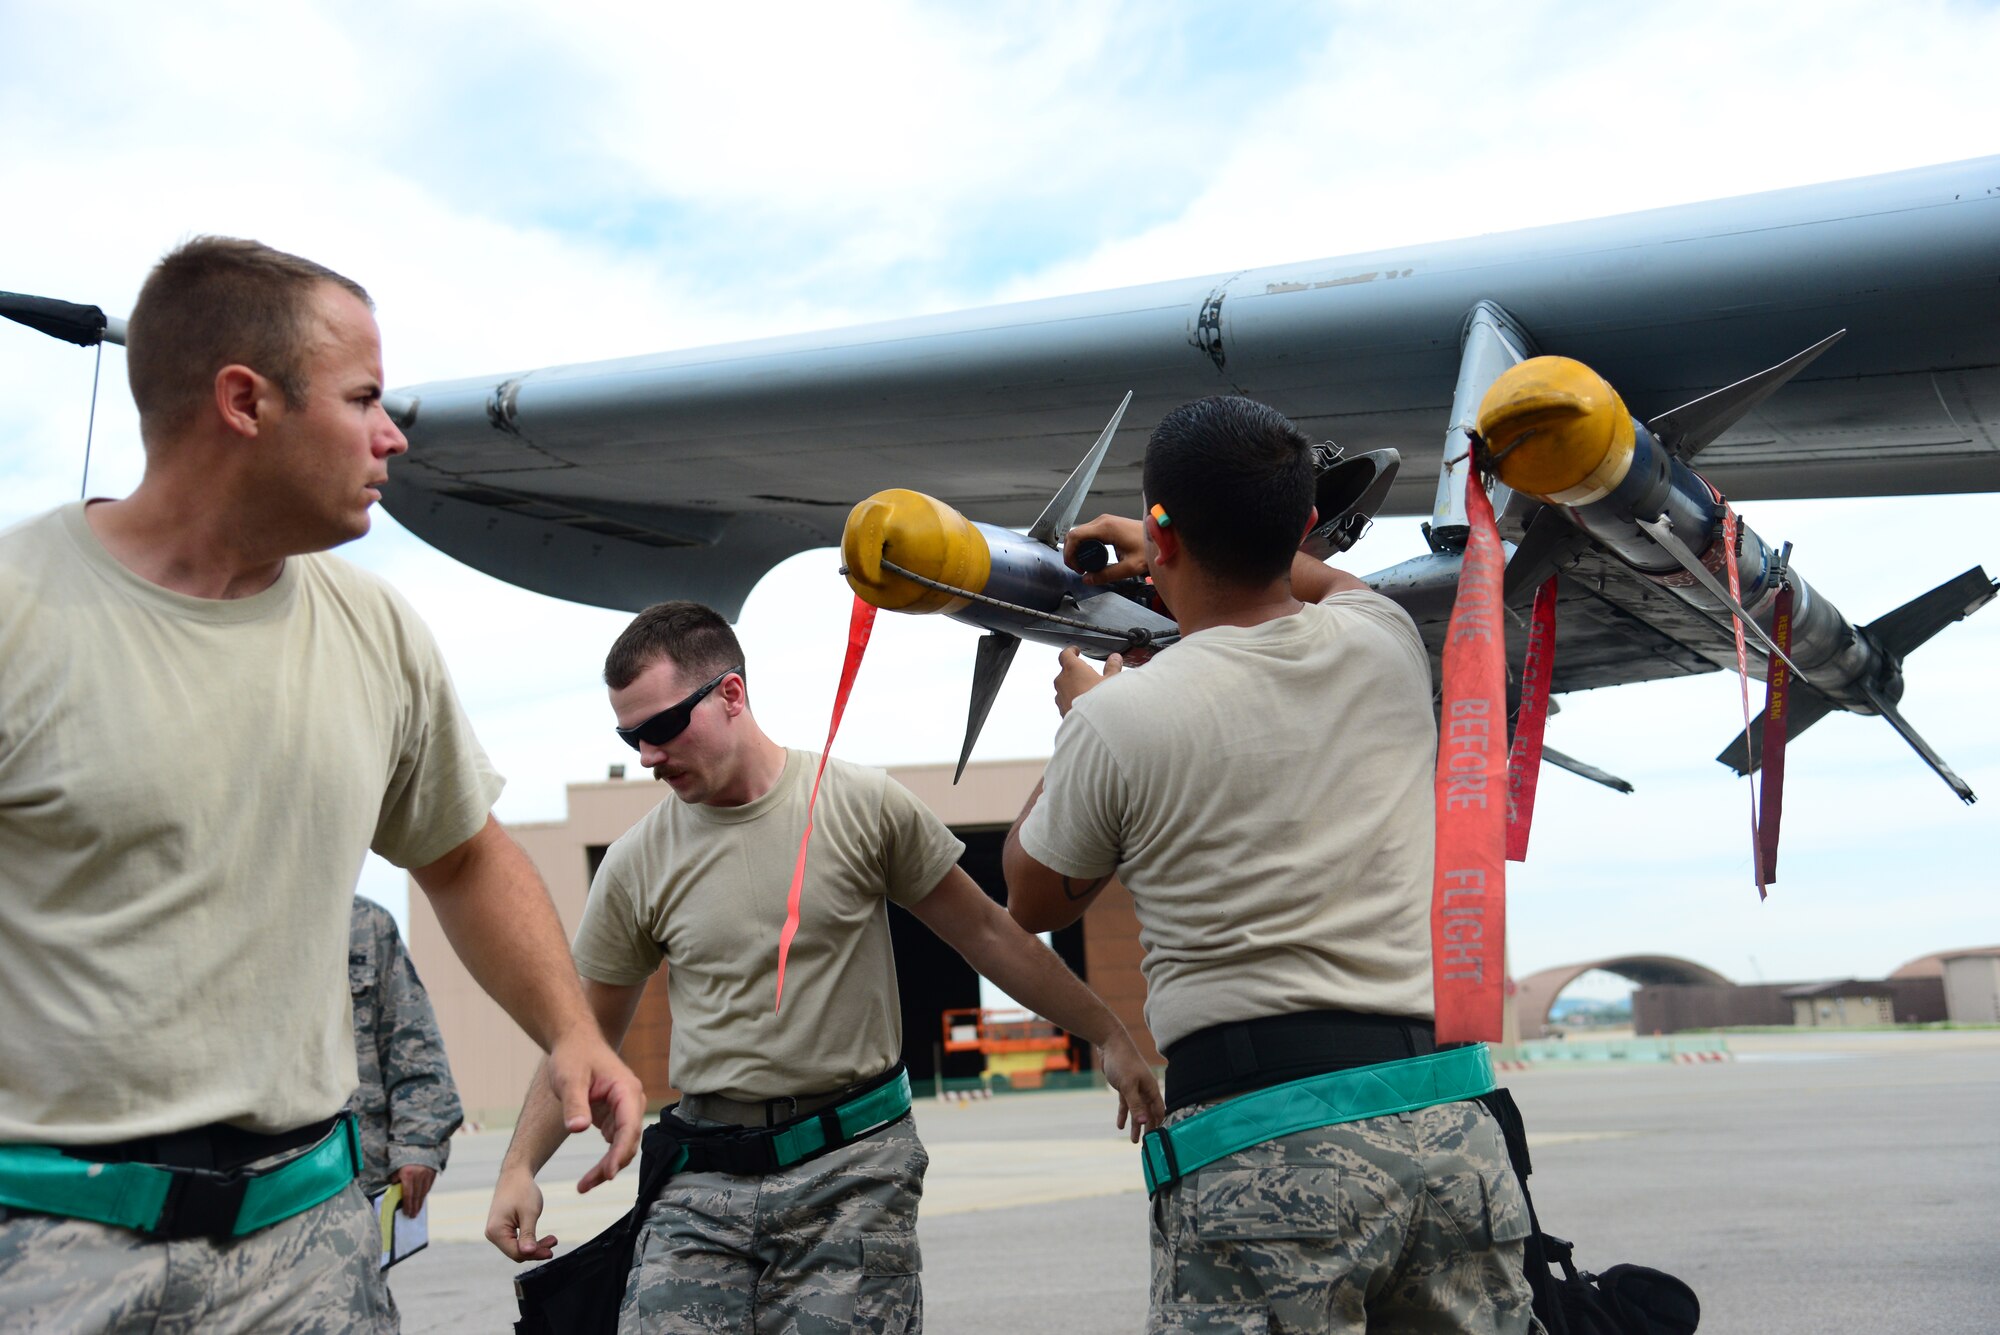 The U.S. Air Force 25th Aircraft Maintenance Unit load team completes loading an air-to-air missile onto their A-10 Thunderbolt II during the quarterly weapons load competition at Osan Air Base, Republic of Korea, July 10, 2015. The event adds an element of competition to a qualification test for the technicians; competitors must complete a written test and a practical demonstration of skill within a fixed amount of time in order to maintain mission readiness status. (U.S. Air Force photo by Staff Sgt. Amber Grimm/Released)